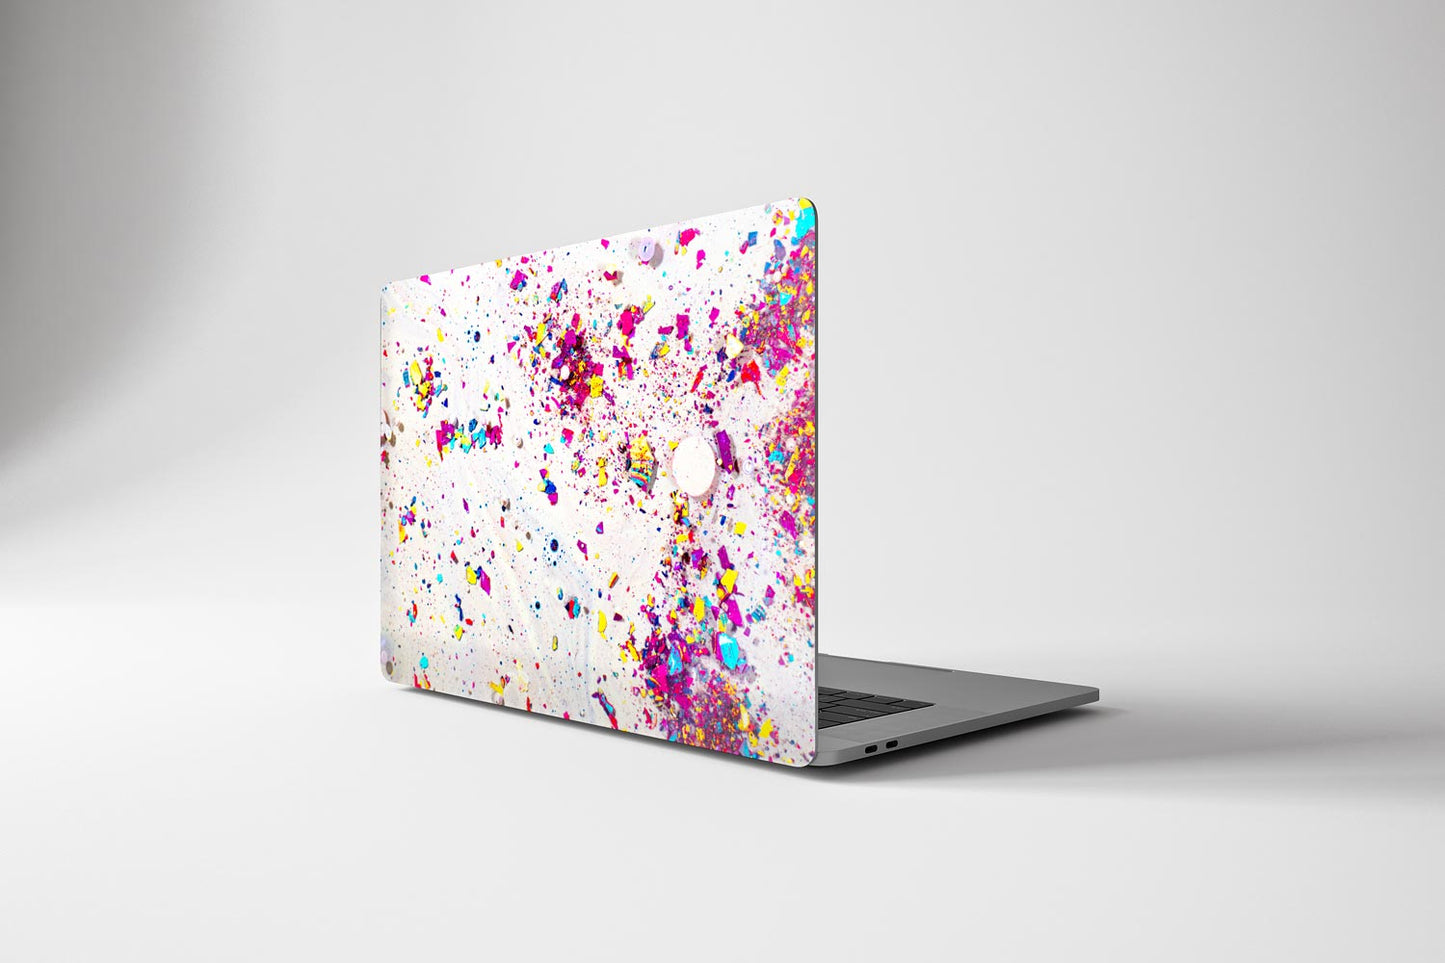 Load image into Gallery viewer, Macbook Hard Shell Case - Candy Chips
